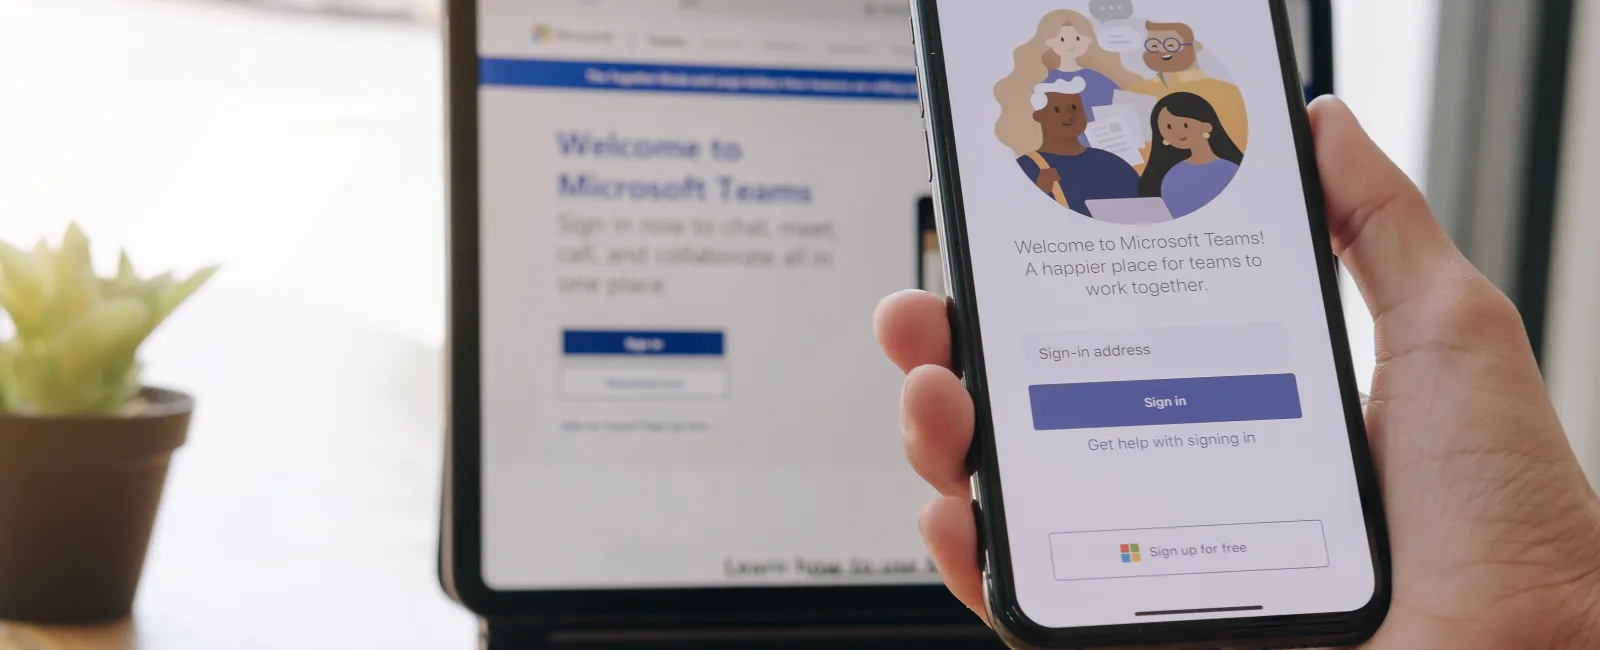 Digital Collaboration Has Arrived with Microsoft Teams